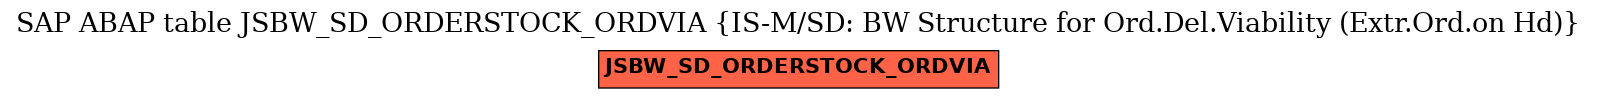 E-R Diagram for table JSBW_SD_ORDERSTOCK_ORDVIA (IS-M/SD: BW Structure for Ord.Del.Viability (Extr.Ord.on Hd))